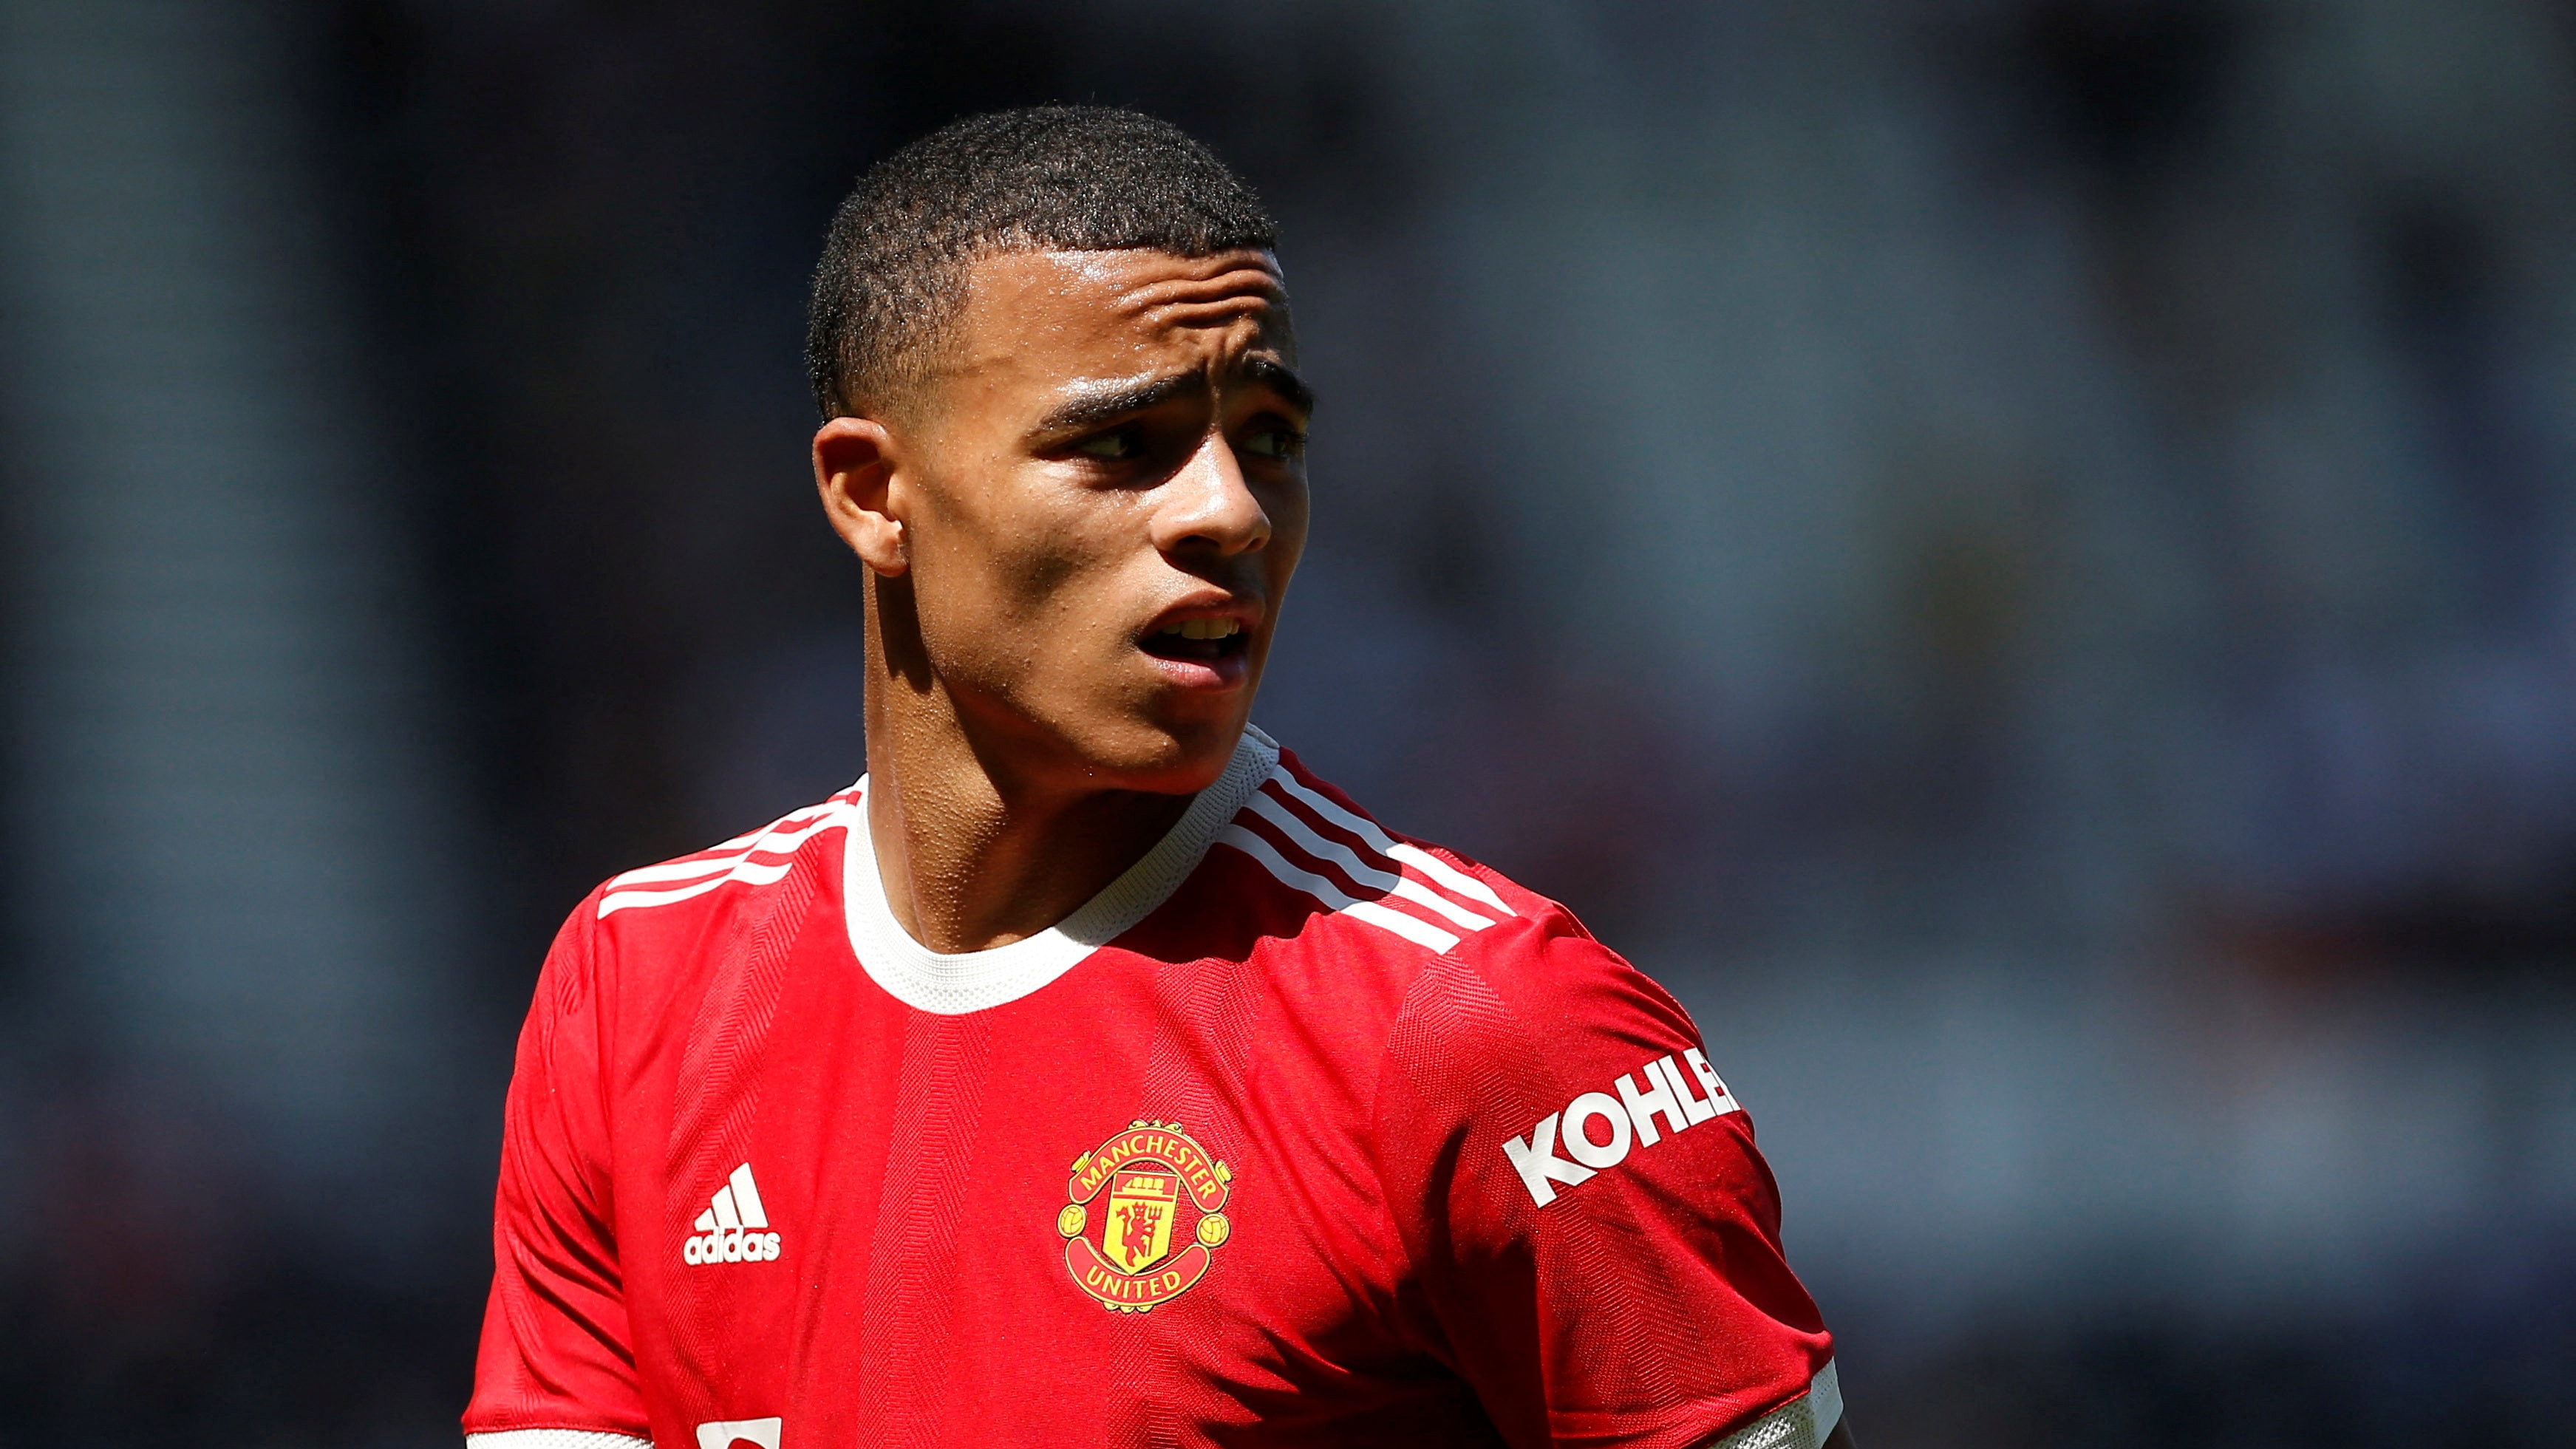 FILE PHOTO: Soccer Football - Pre Season Friendly - Derby County v Manchester United - Pride Park, Derby, Britain - July 18, 2021 Manchester United's Mason Greenwood Action Images via Reuters/Craig Brough/File Photo